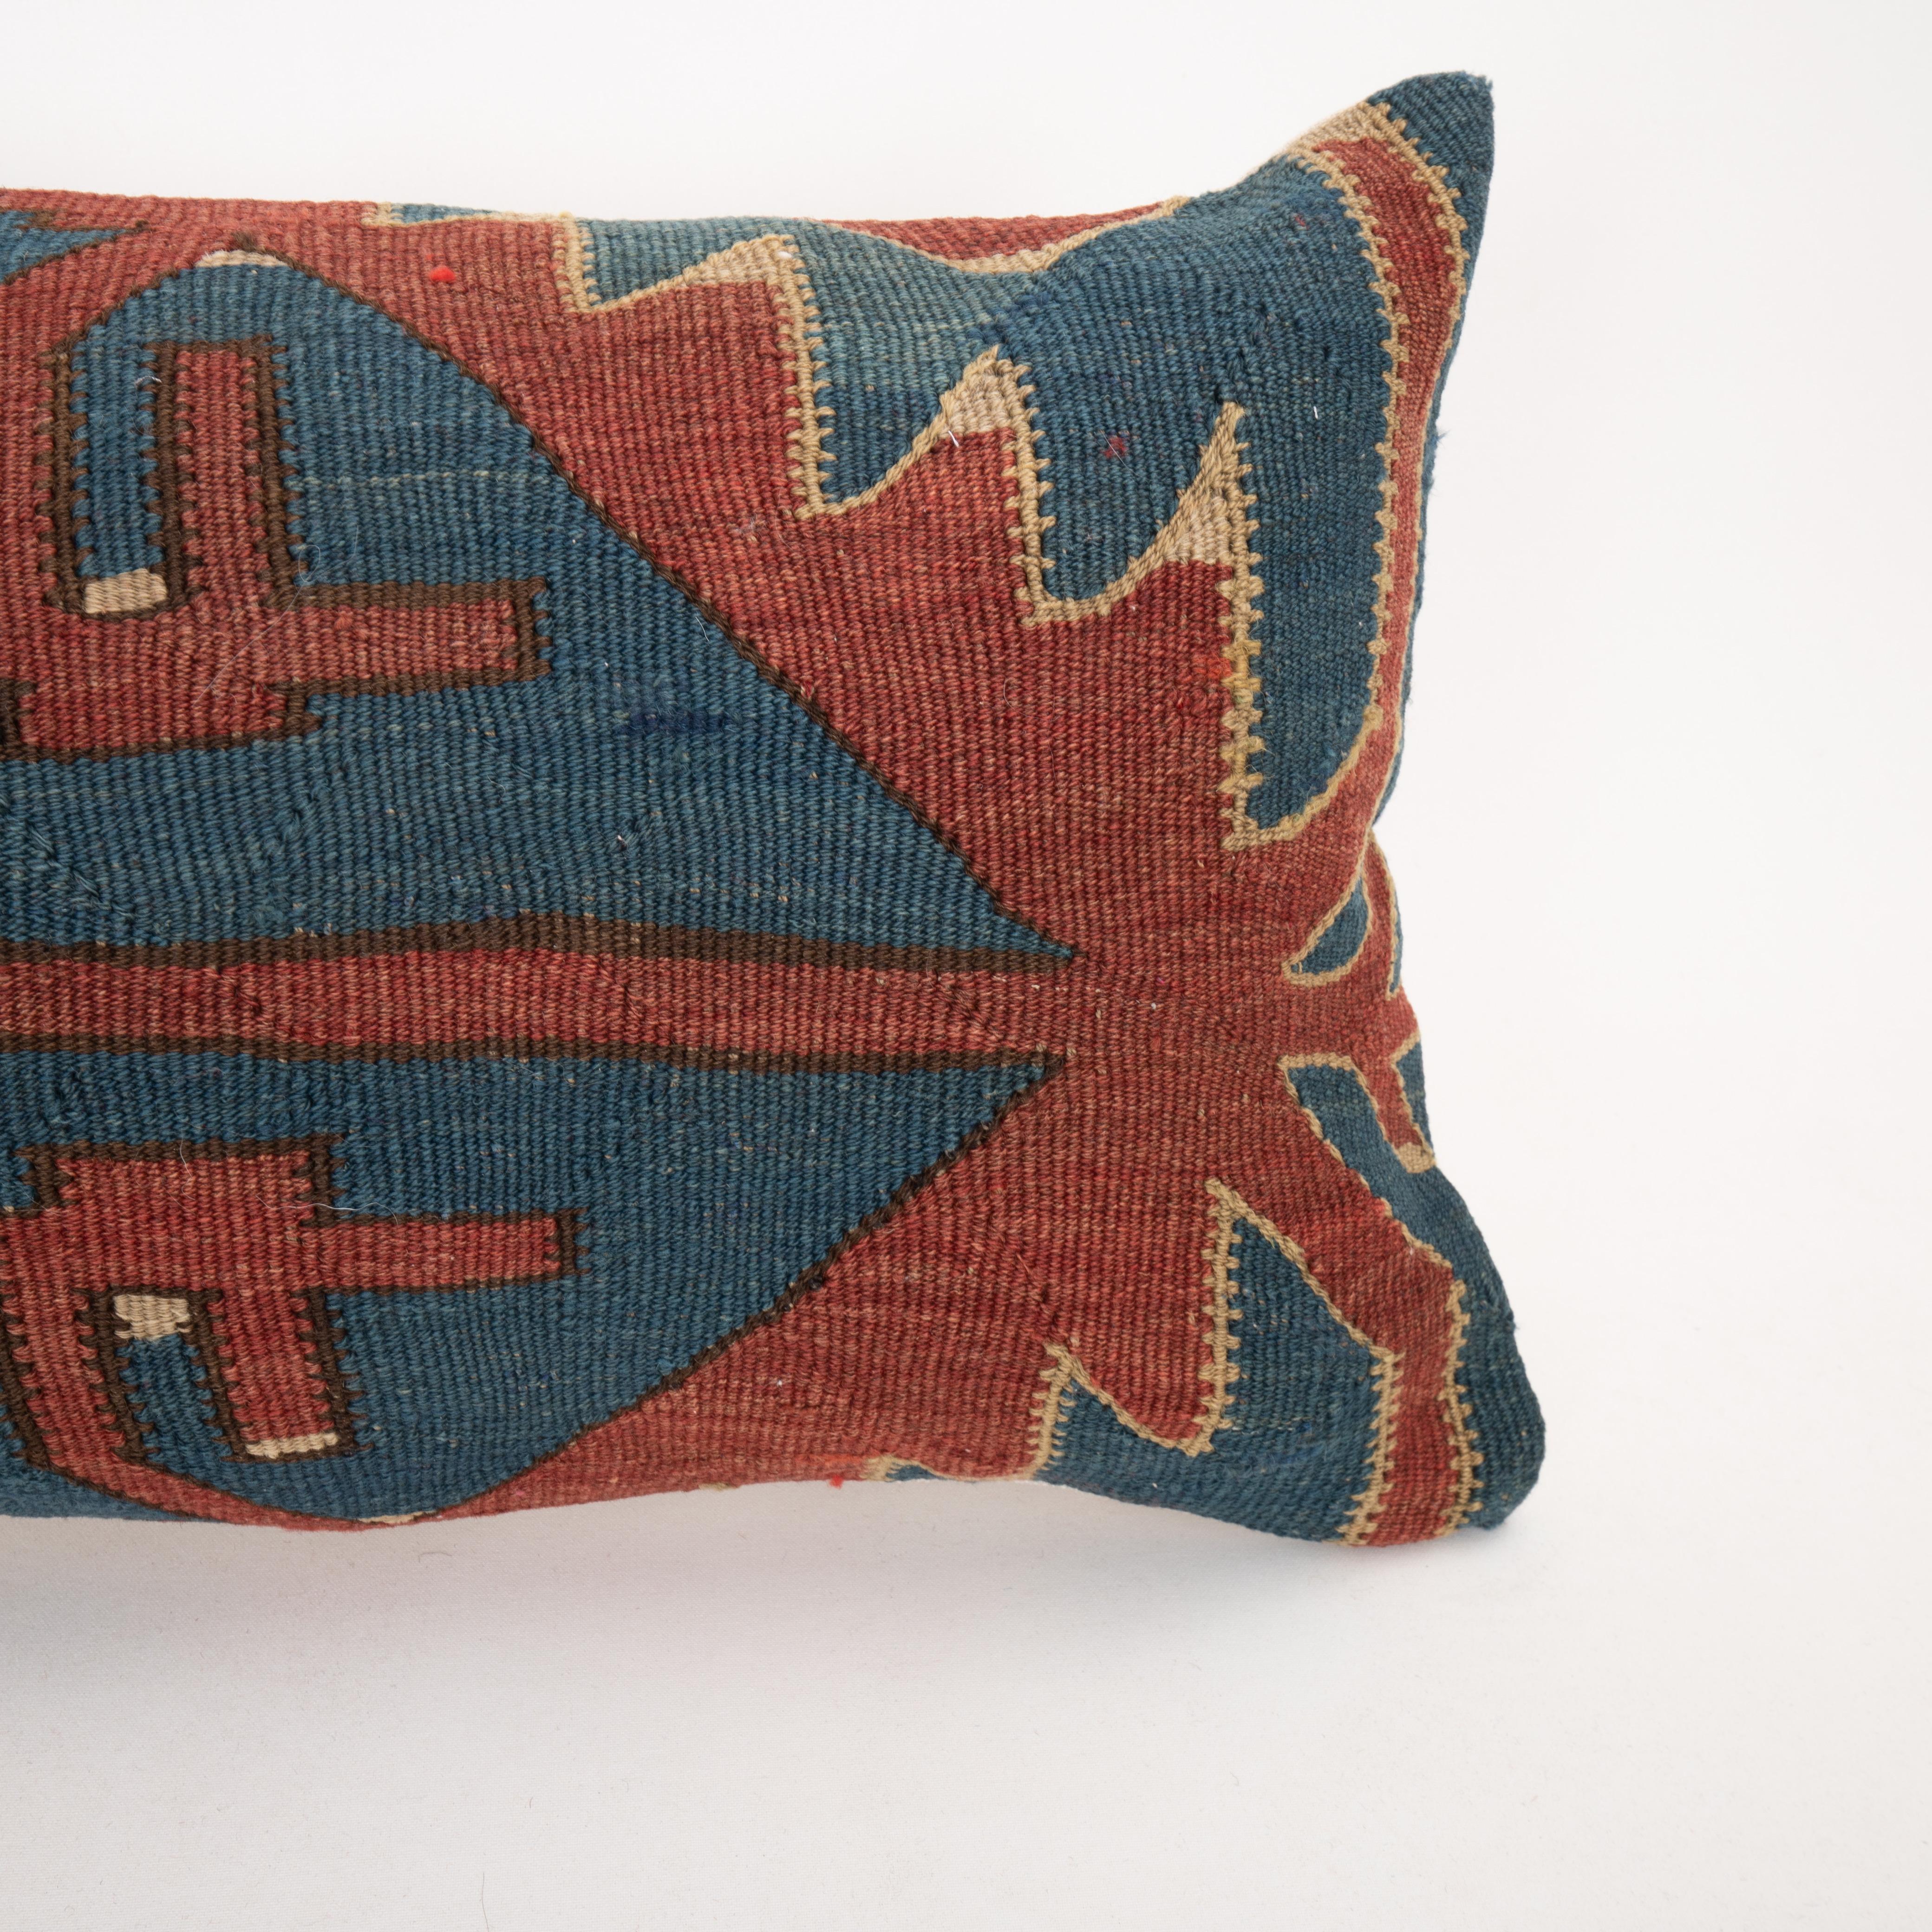 Hand-Woven Cushion Made from an Antique Avar Kilim from Dagestan , Early 20th C. For Sale